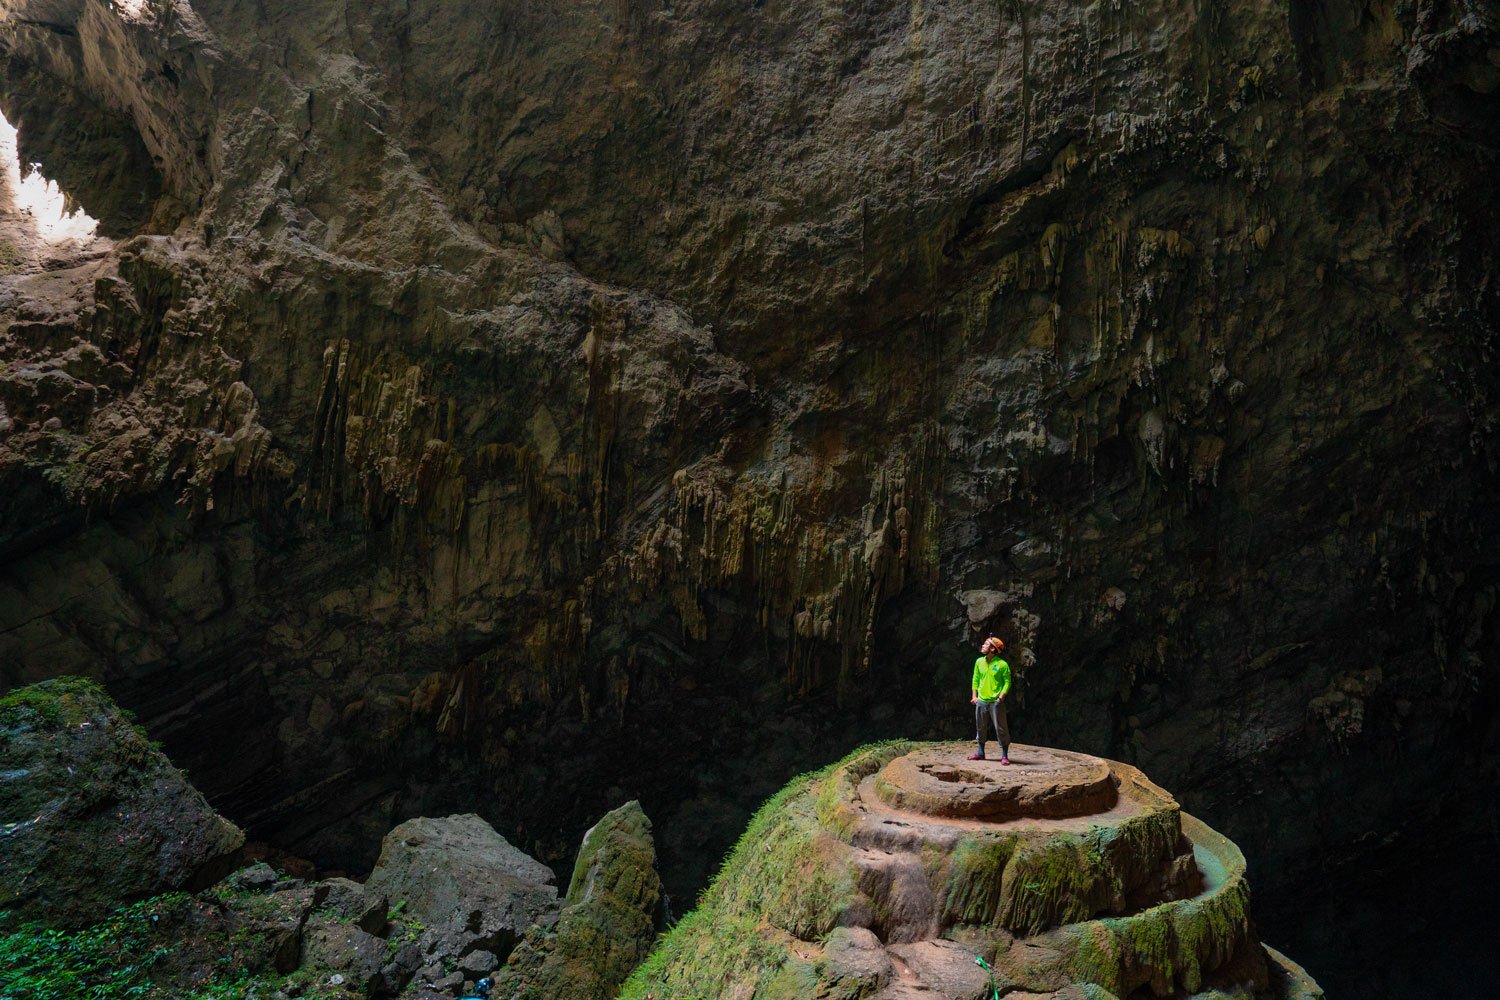 The wedding cake stalagmite is one of the signatures of Son Doong Cave